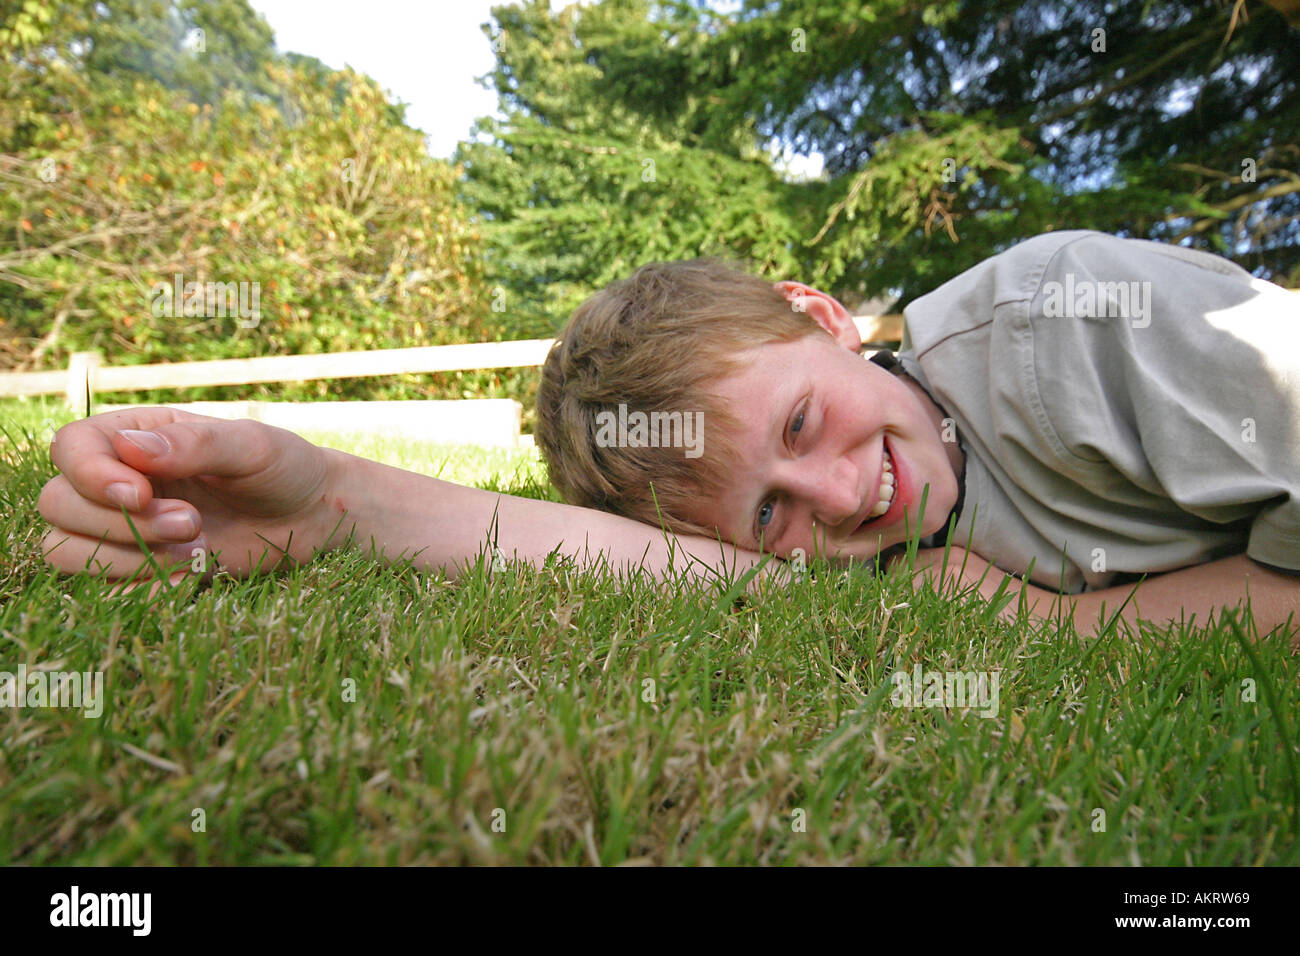 Boy laying on the grass Banque D'Images